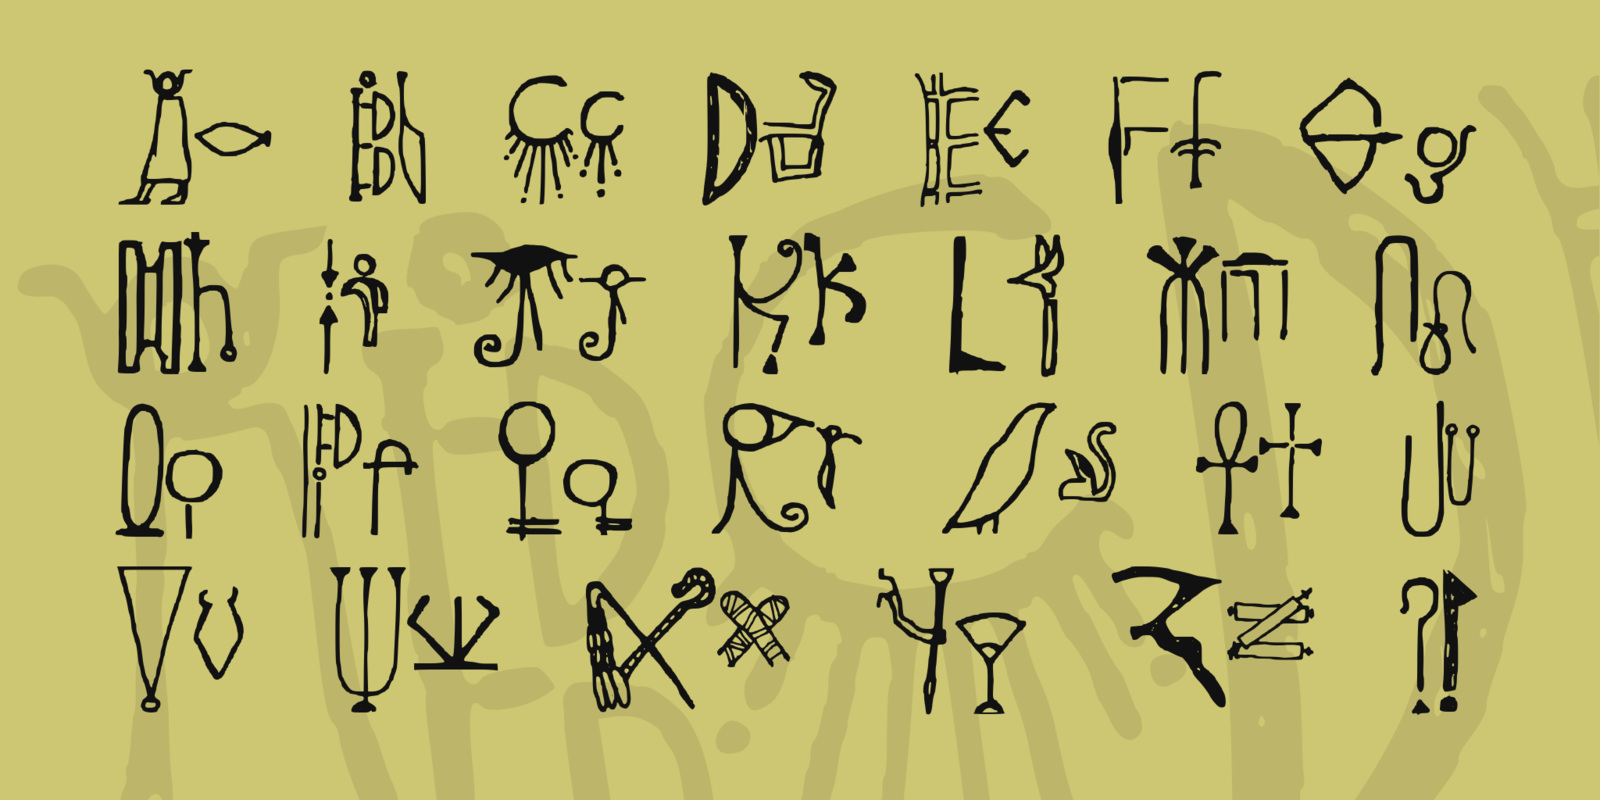 Download Free Throne Of Egypt Font Download Free For Desktop Webfont Fonts Typography